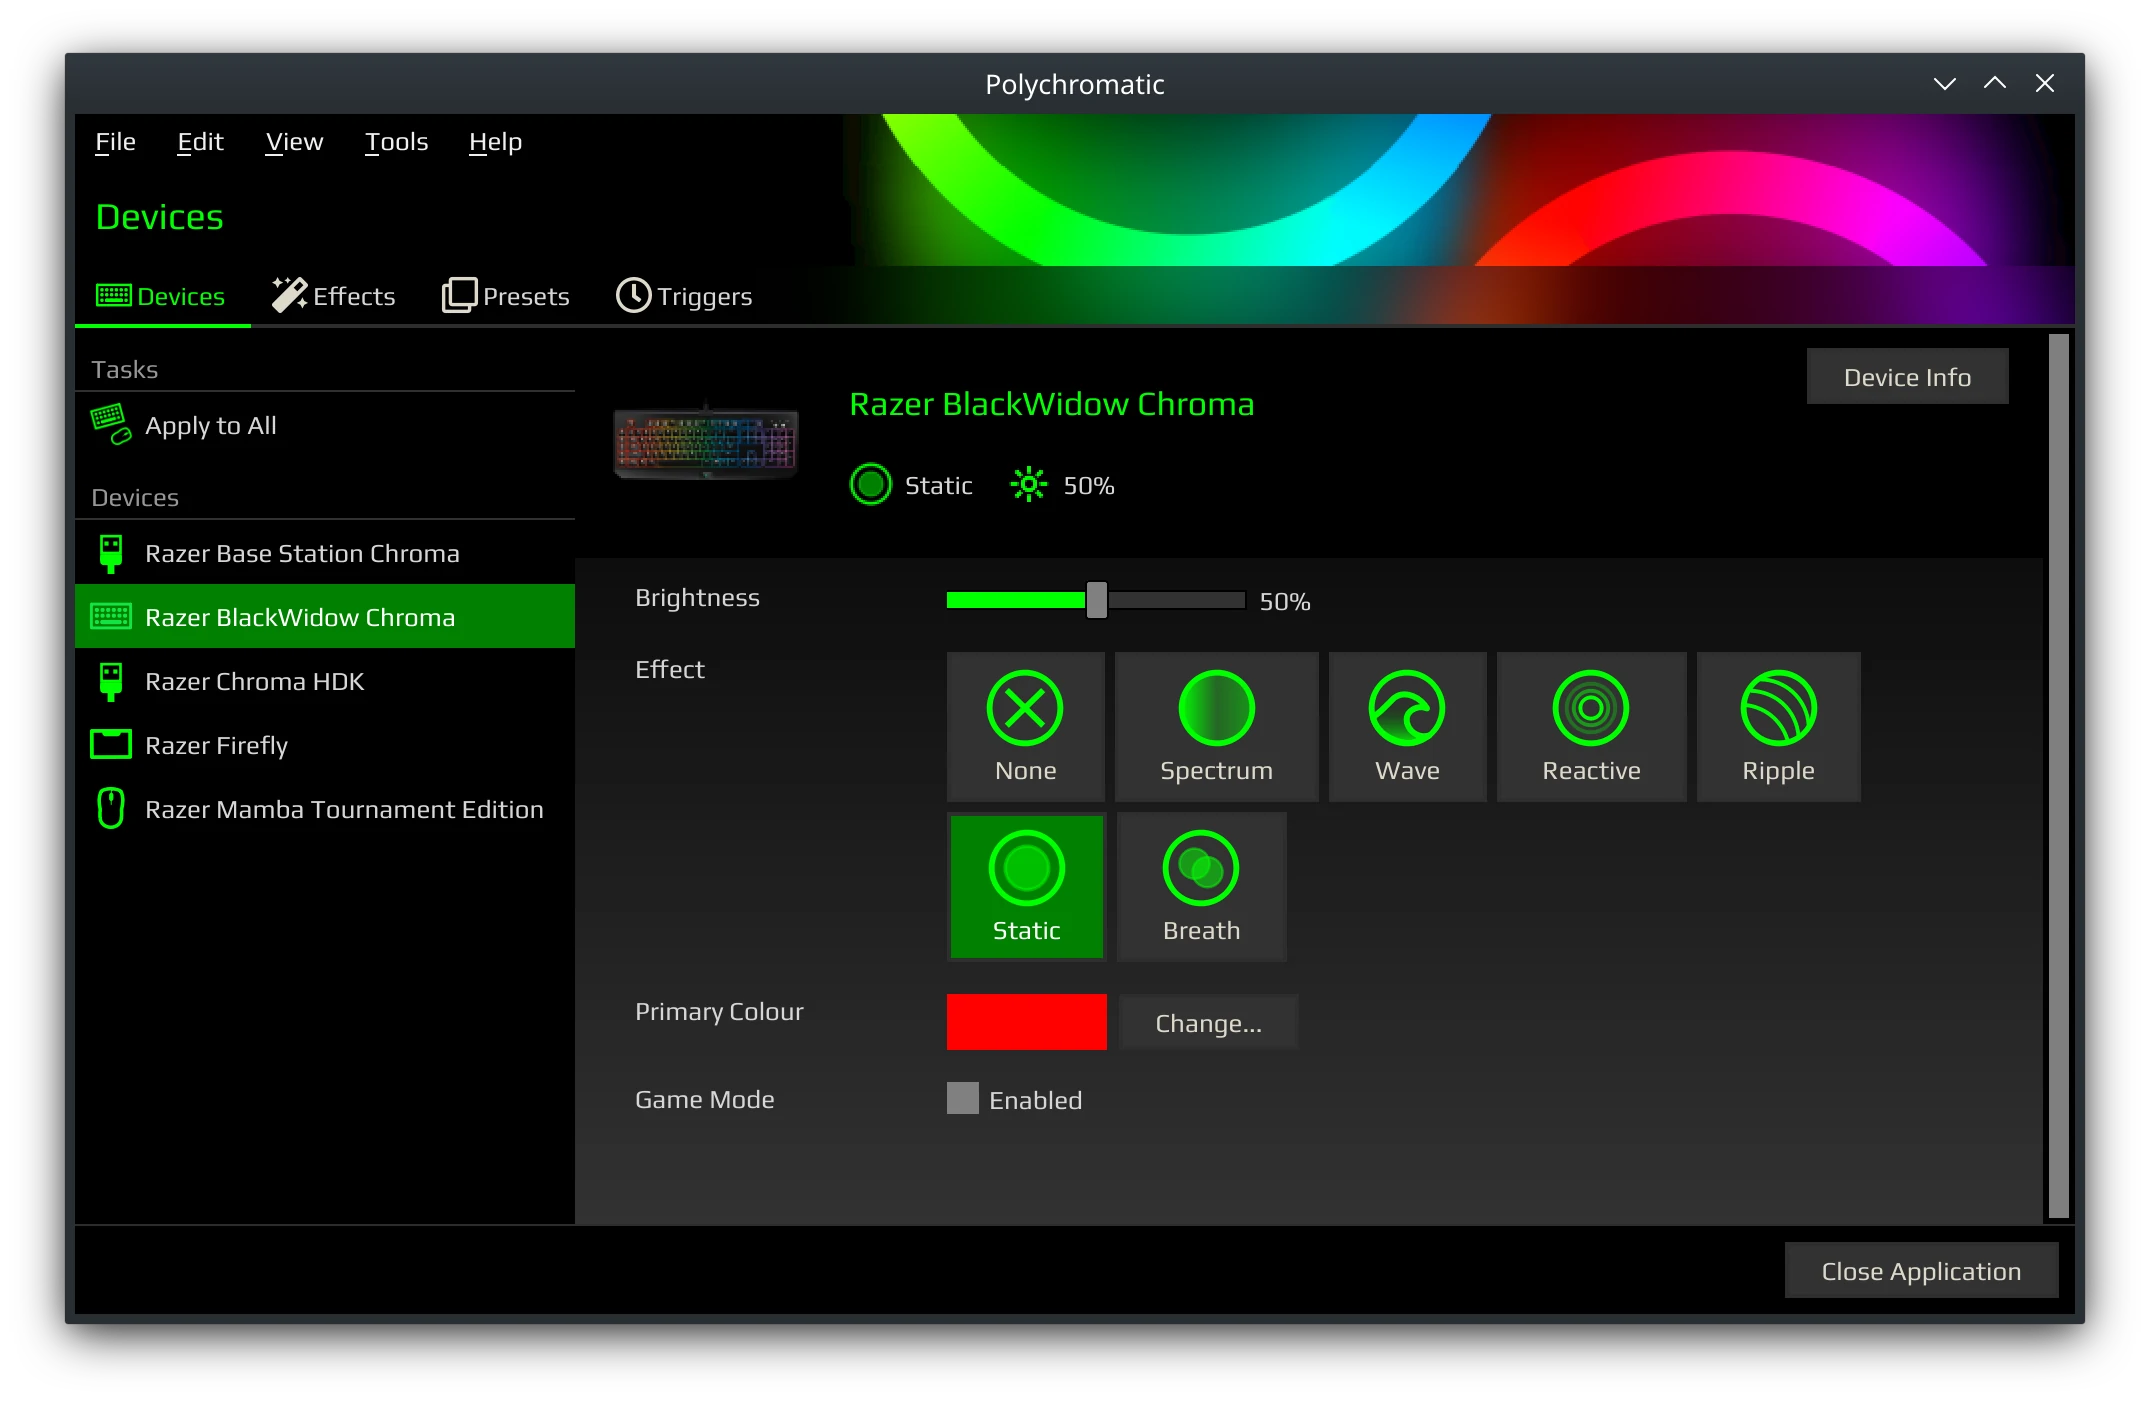 Screenshot of Polychromatic's v1.0.0 Controller interface